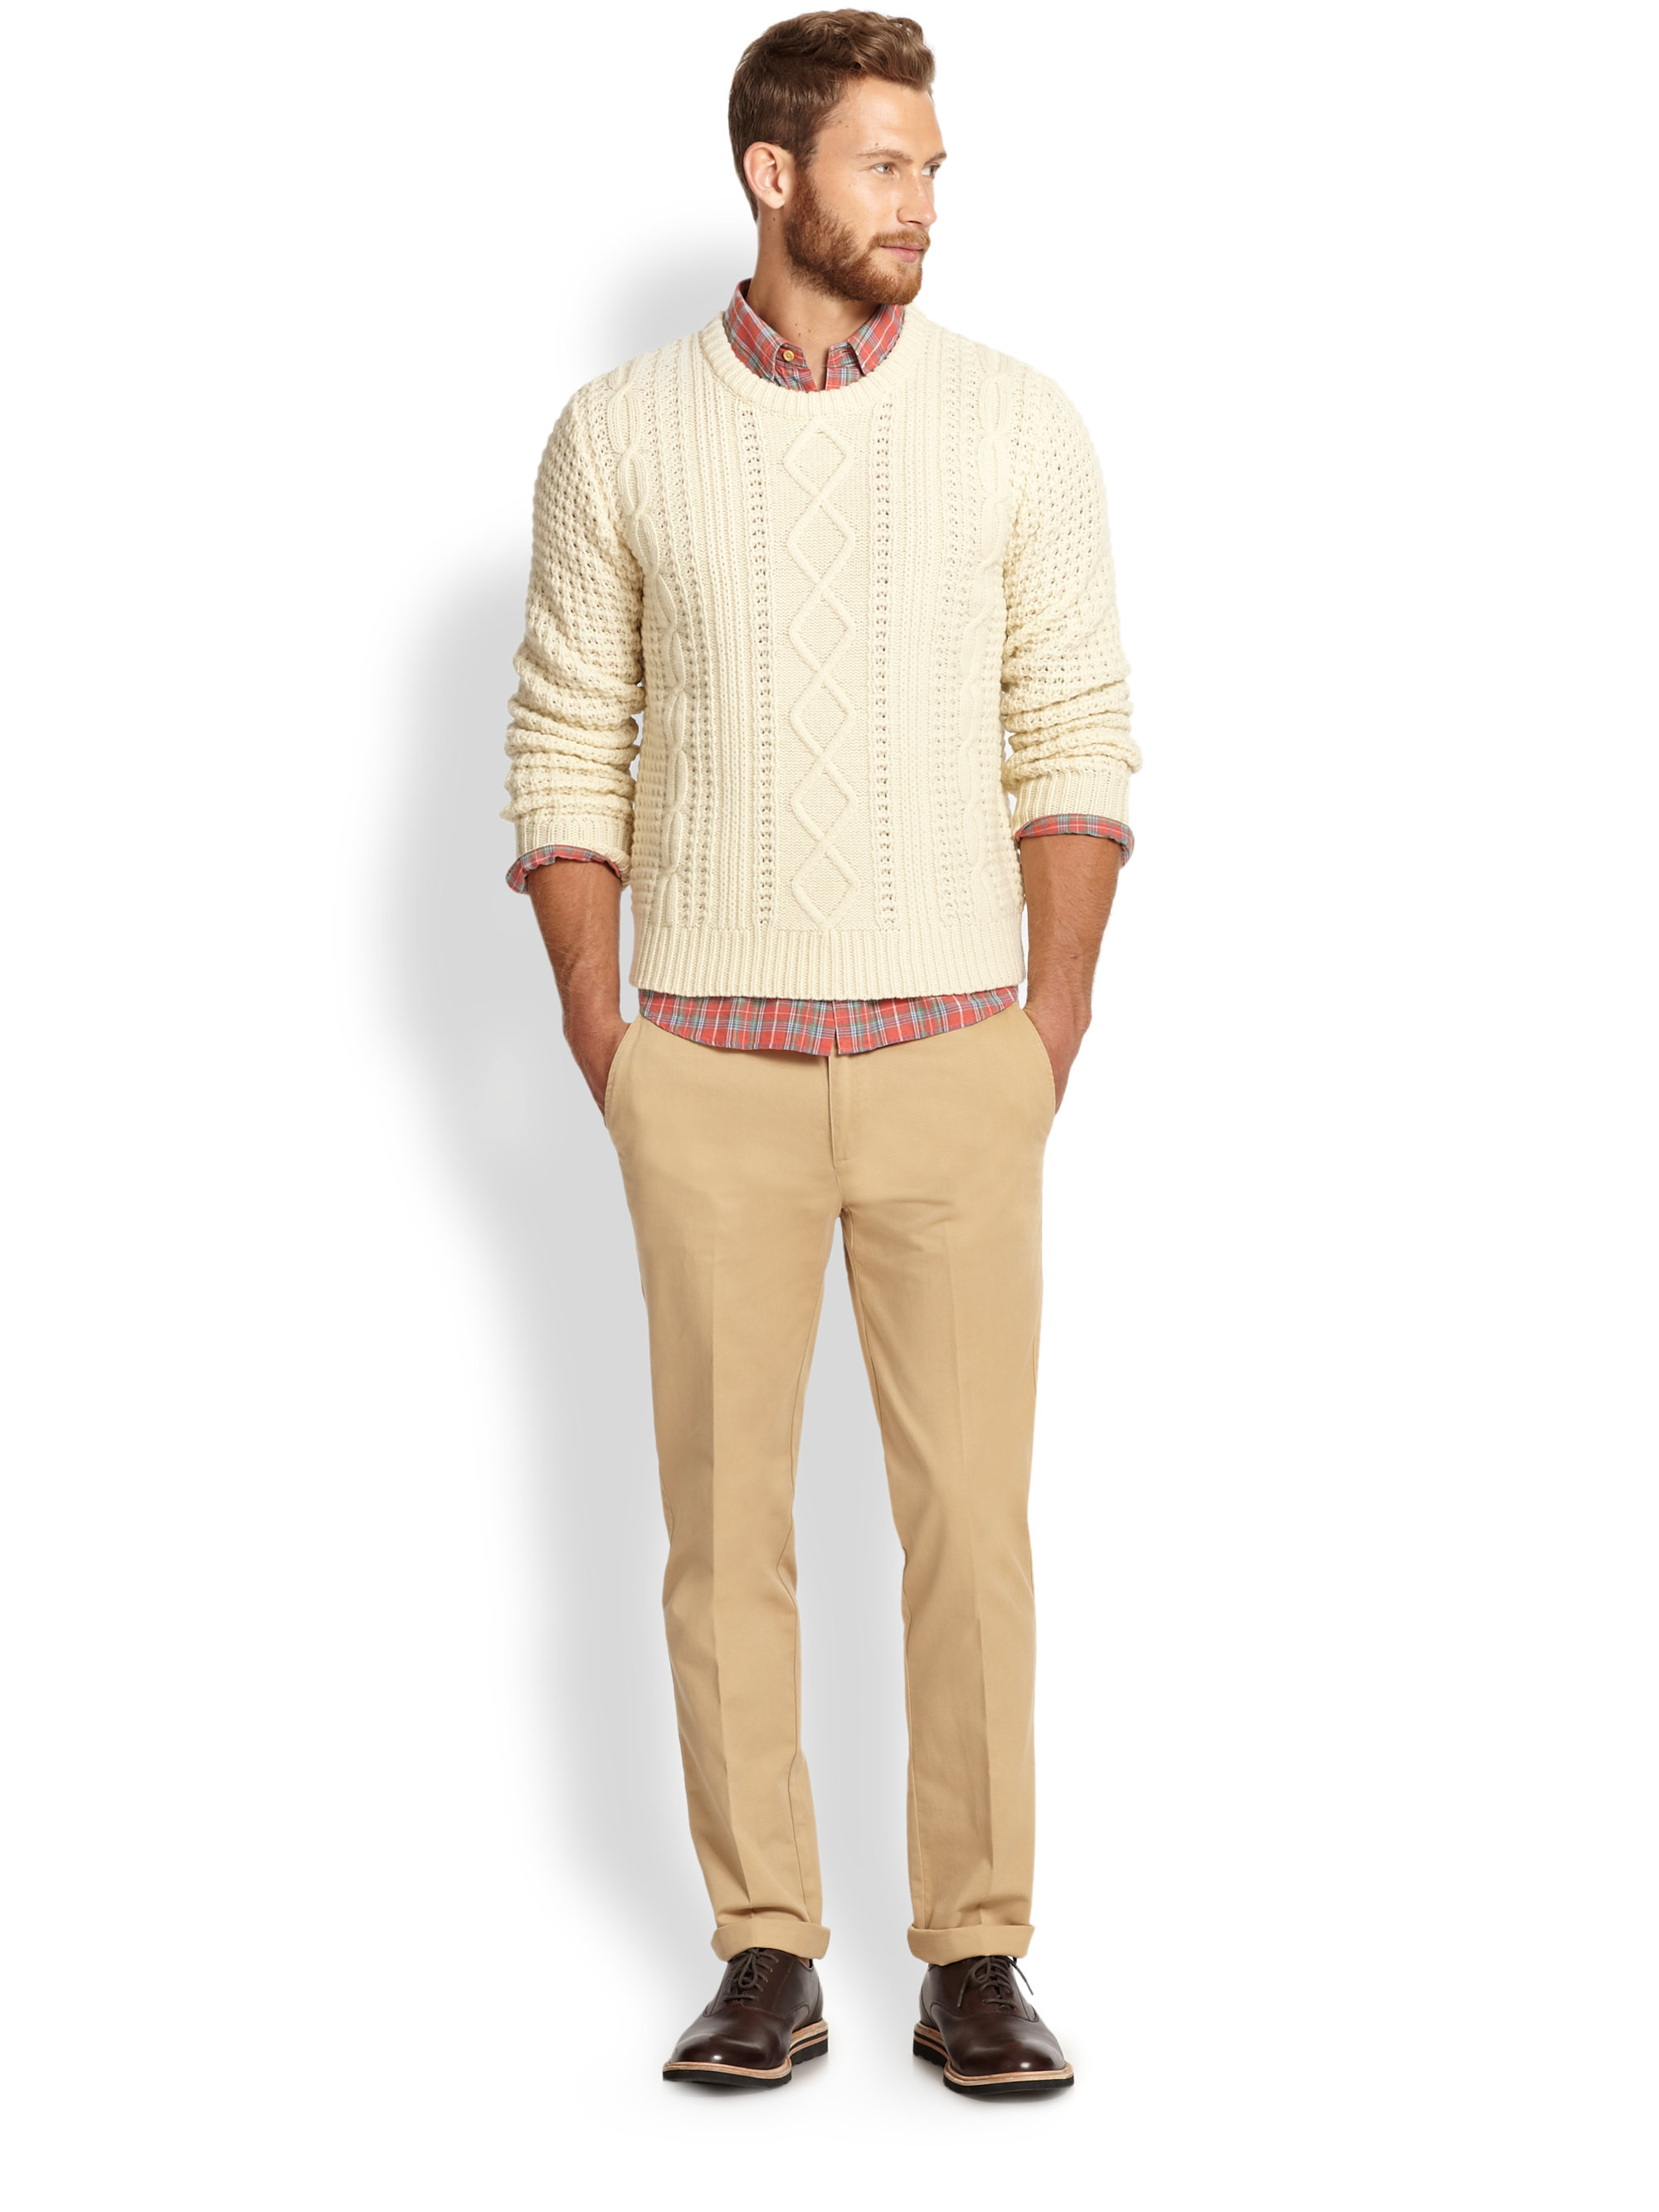 Gant Rugger Lambswool Cable Knit Sweater in Ivory (White) for Men - Lyst